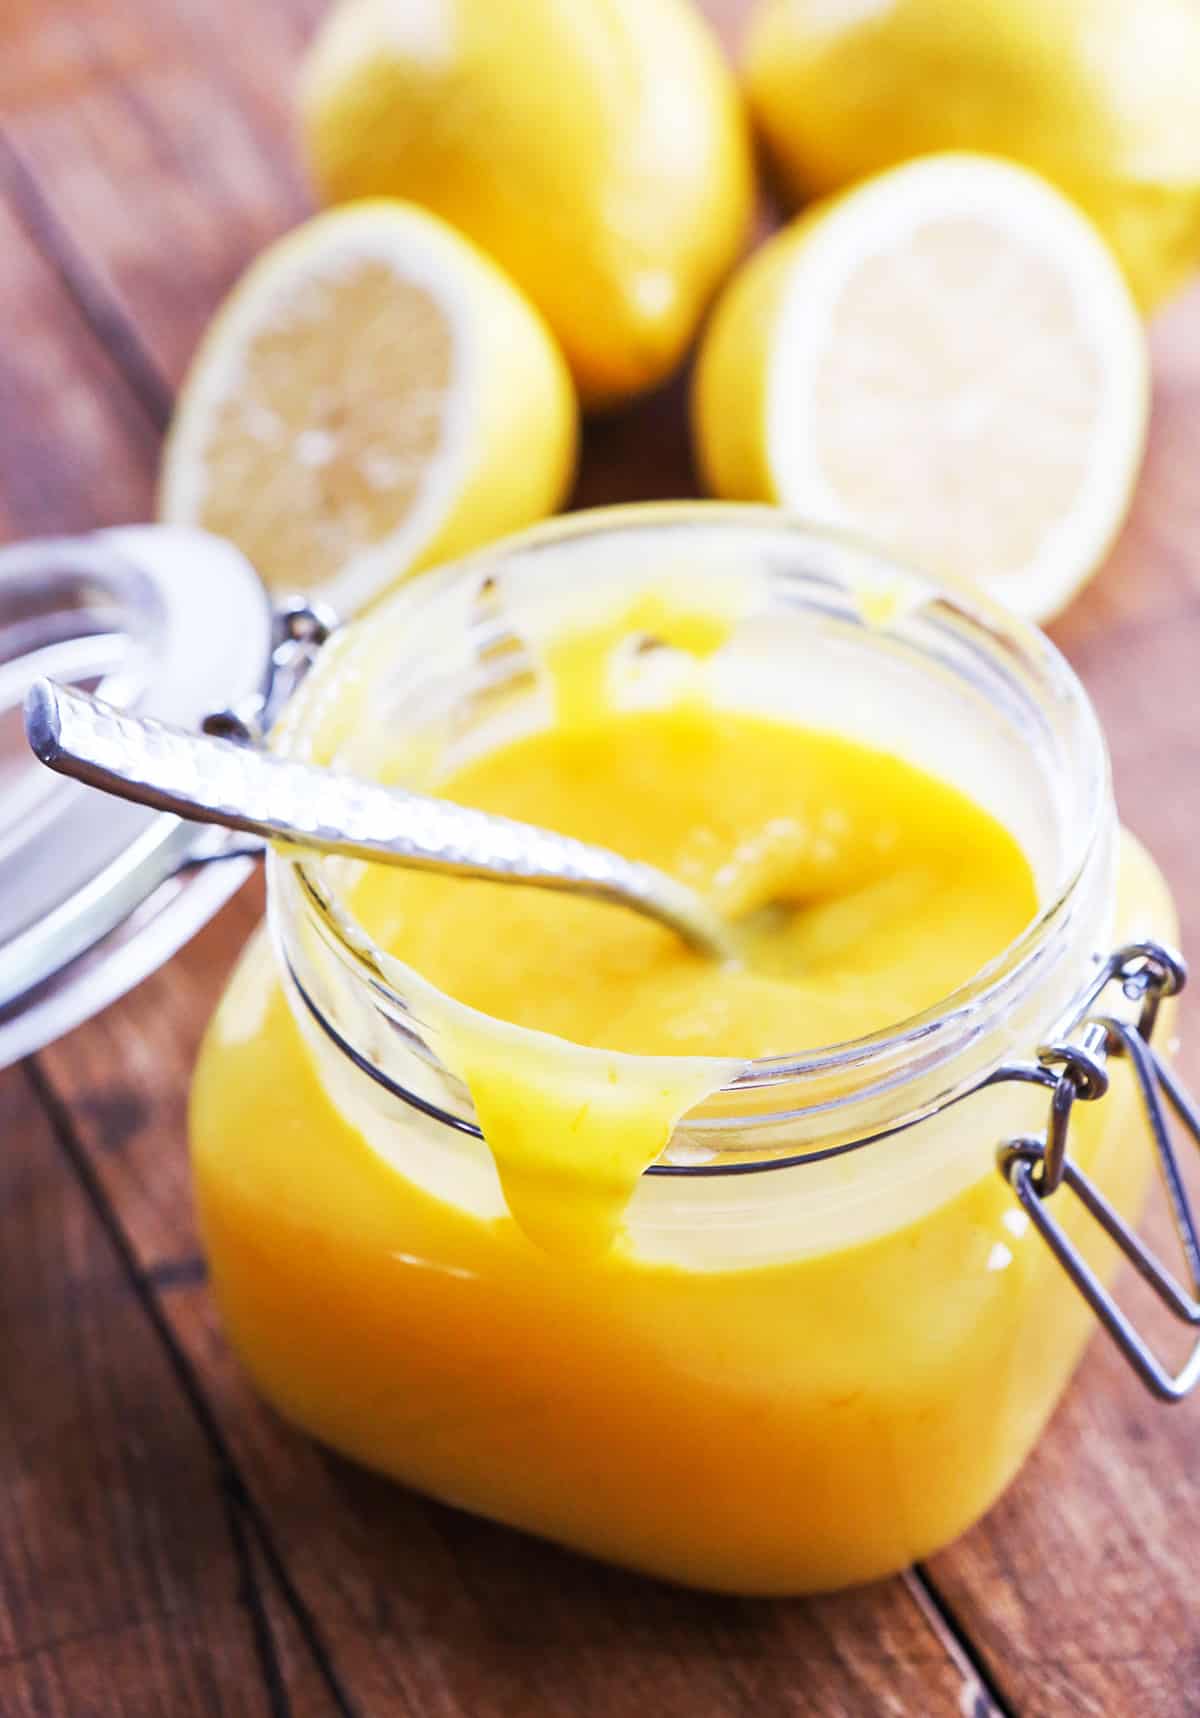 Jar filled with lemon curd, surrounded by lemons that have been cut in half.